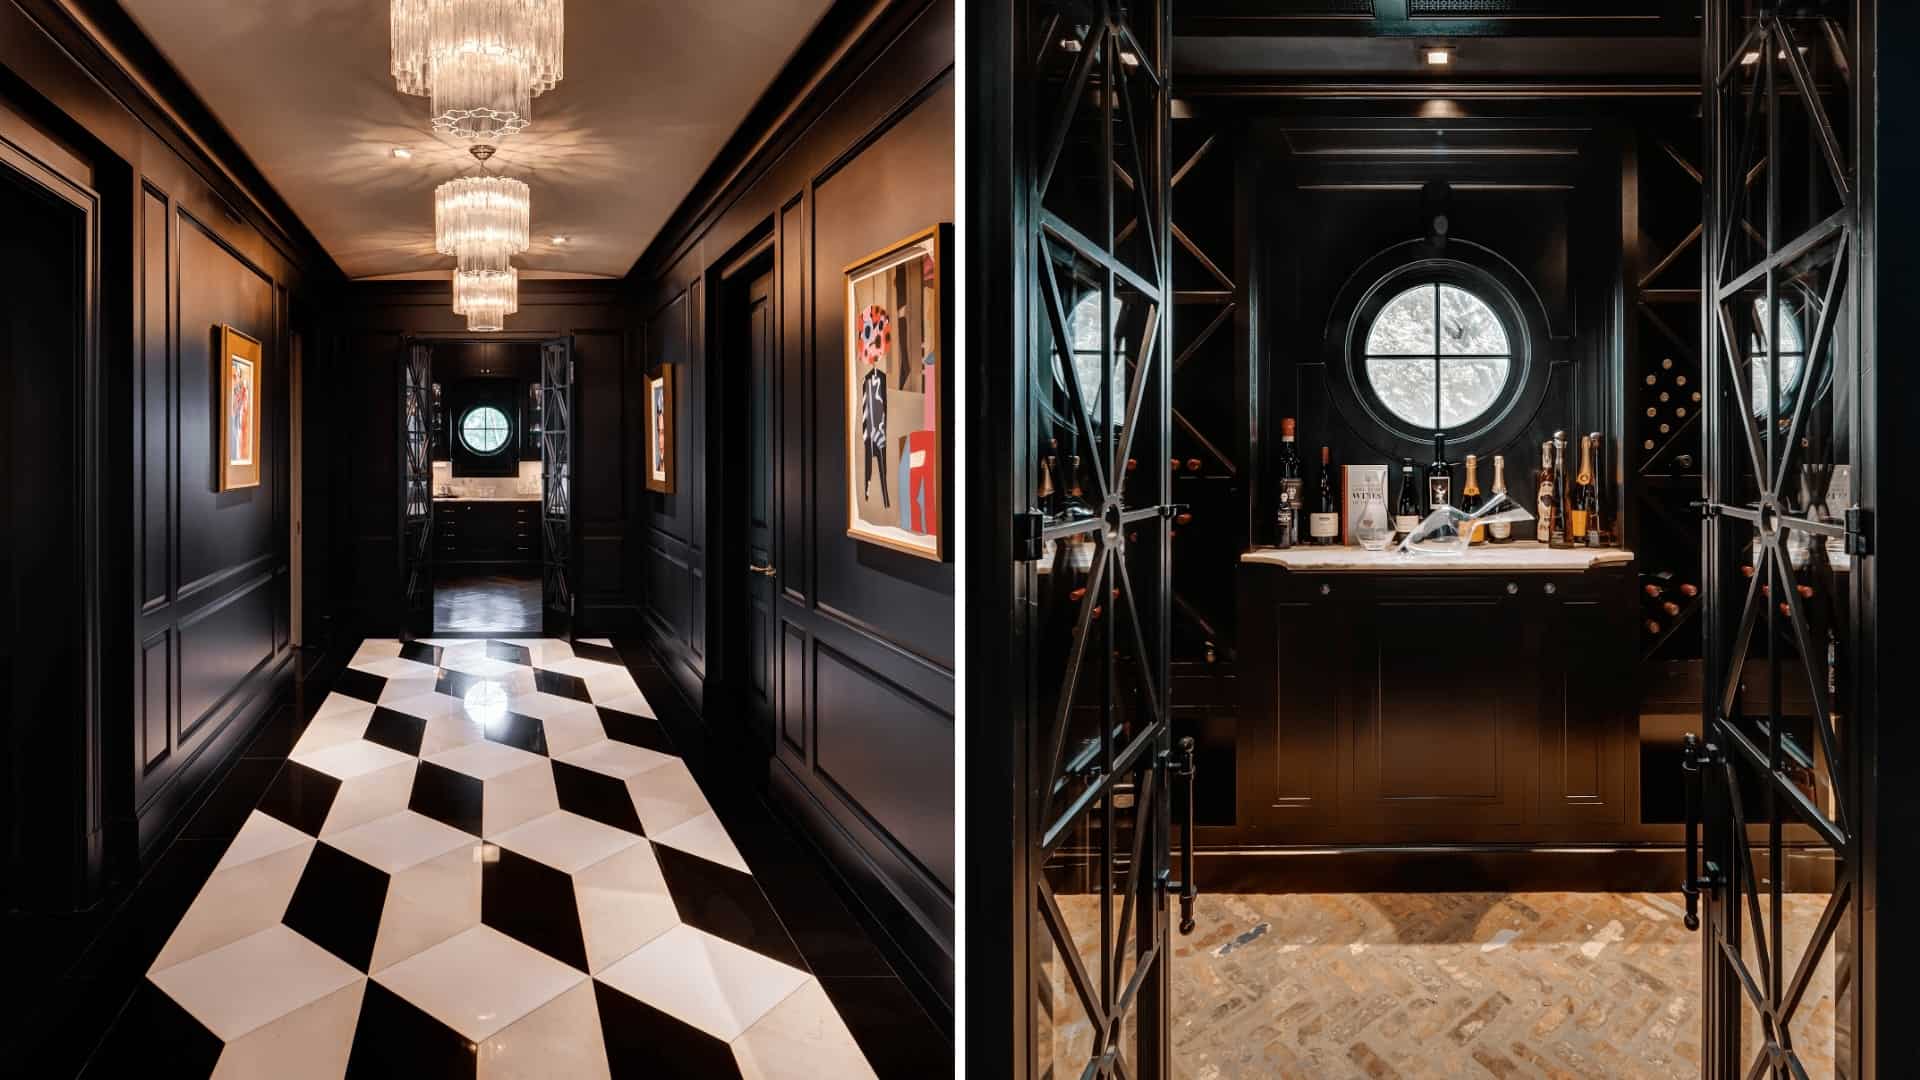 Contrasting black and white tile lends bold drama to this hallway